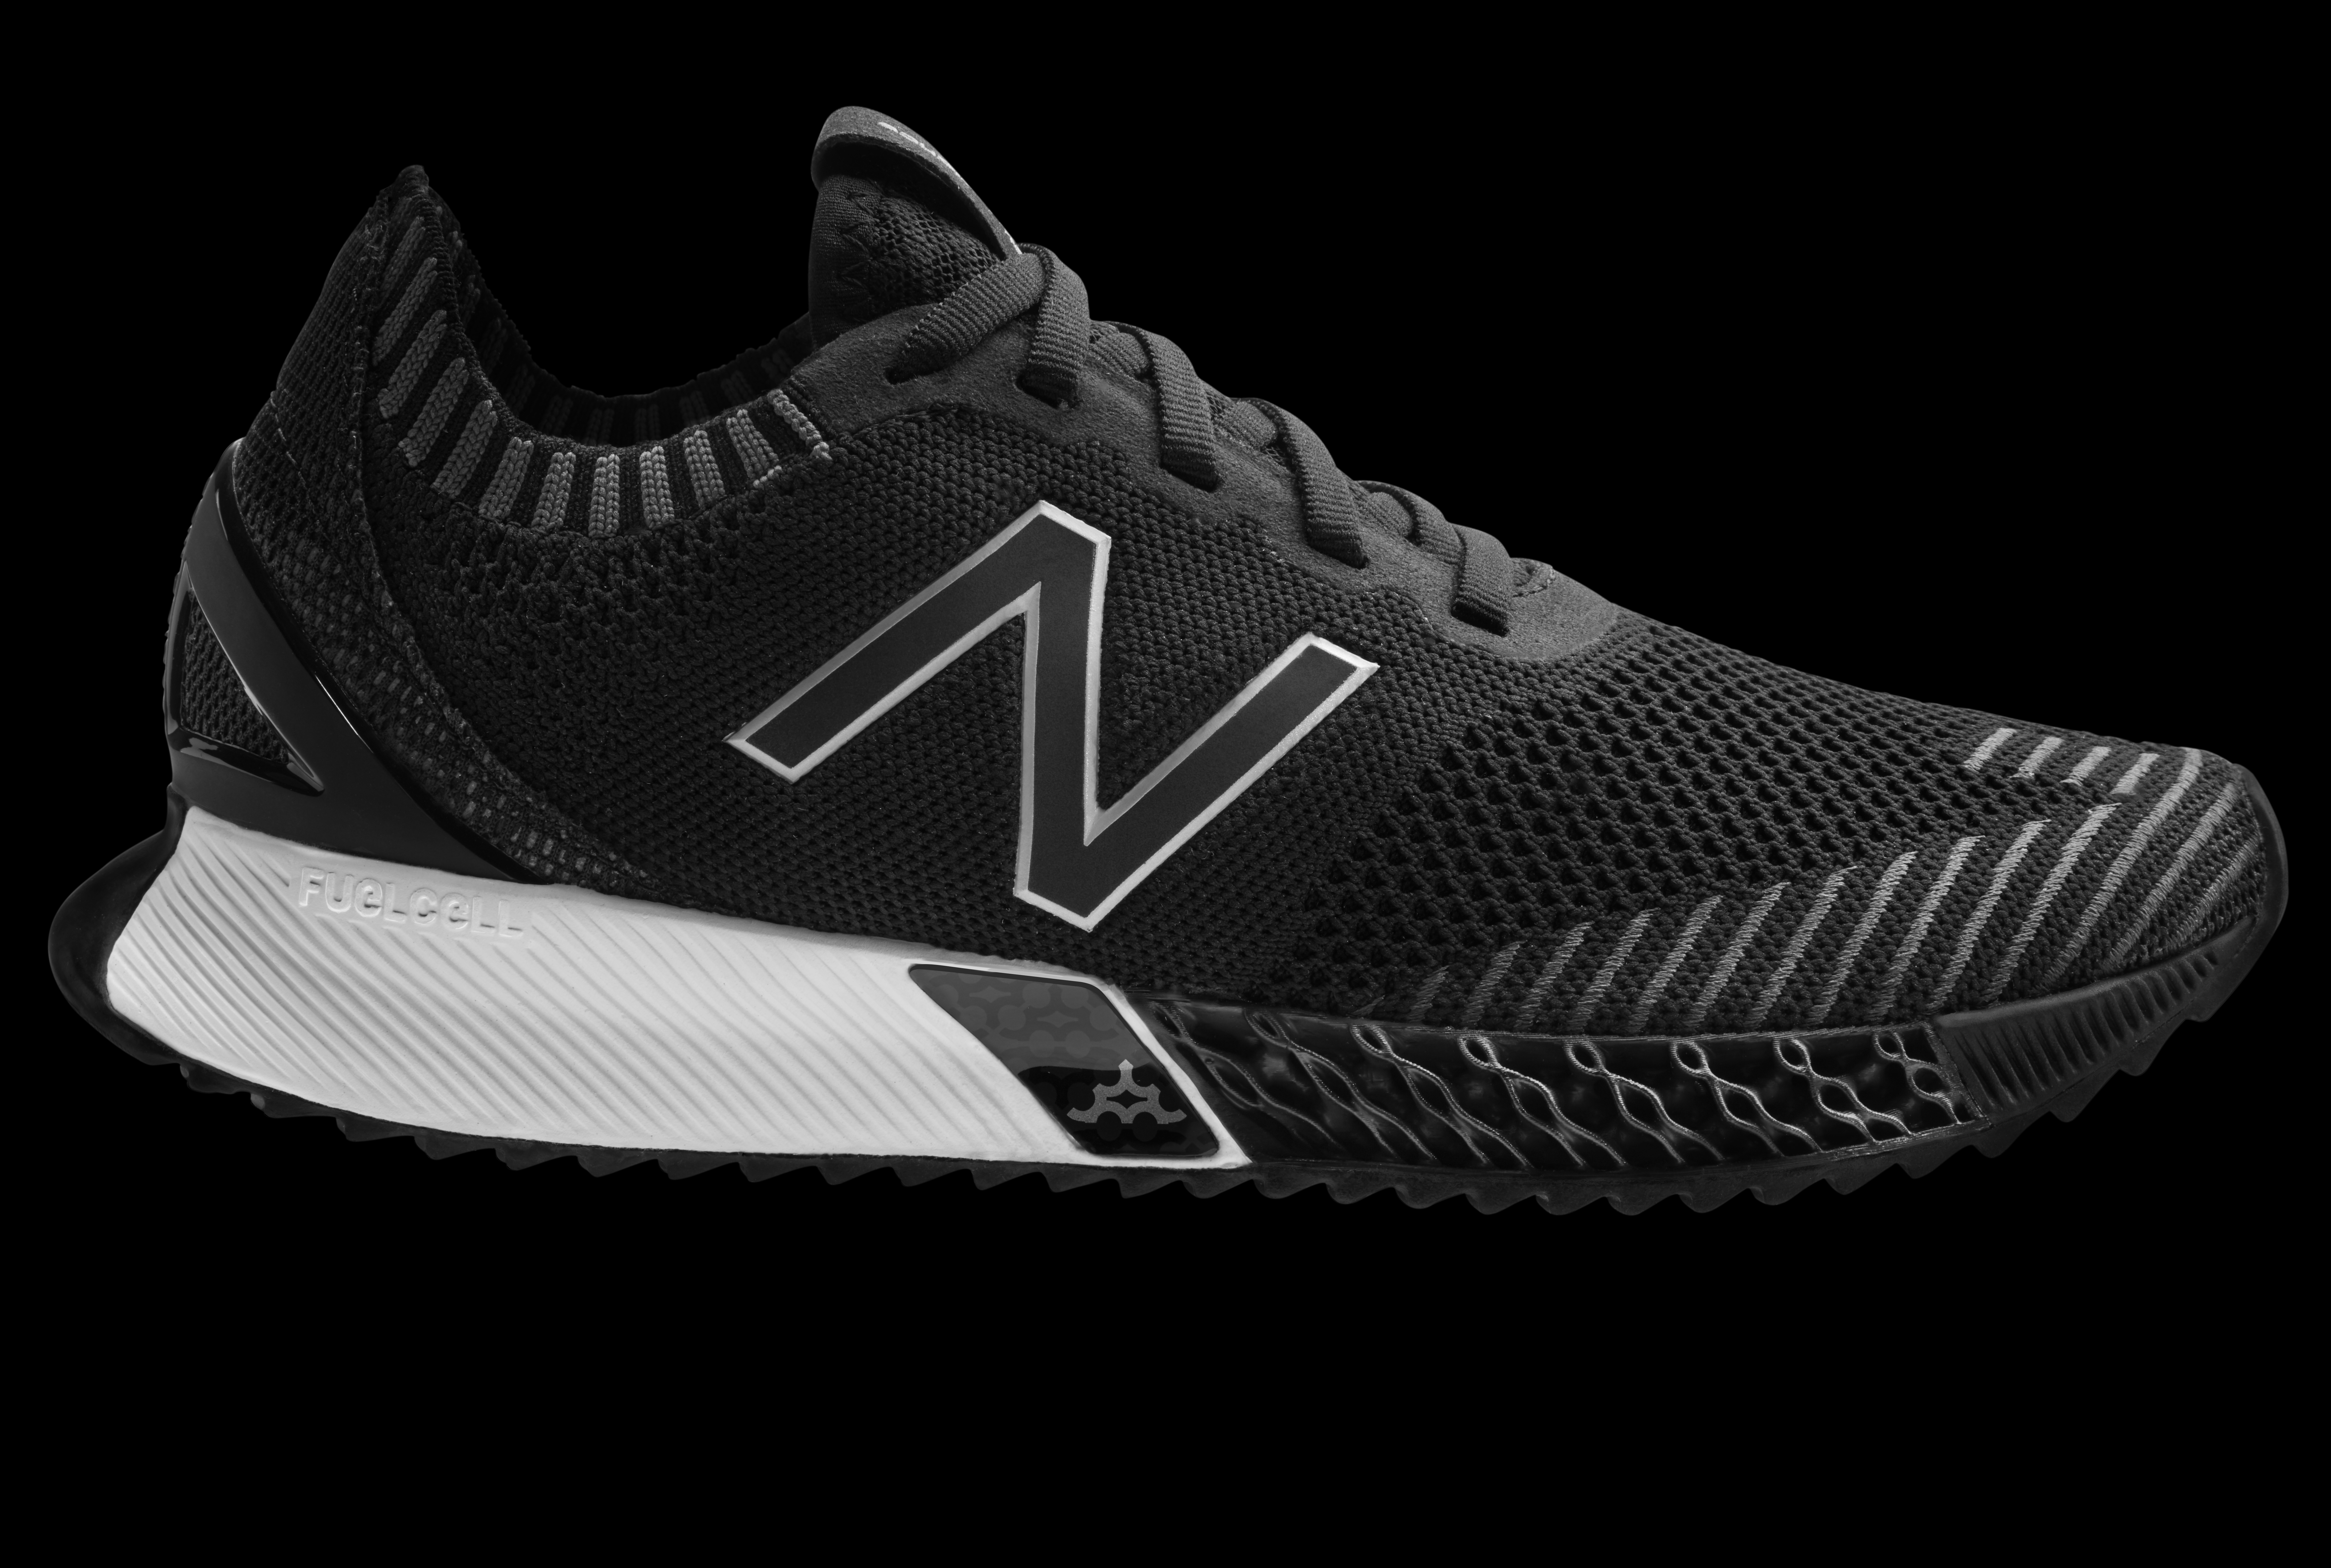 Portal horario Objetivo New Balance and Formlabs reveal TripleCell sneaker with upgraded 3D printed  forefoot - 3D Printing Industry